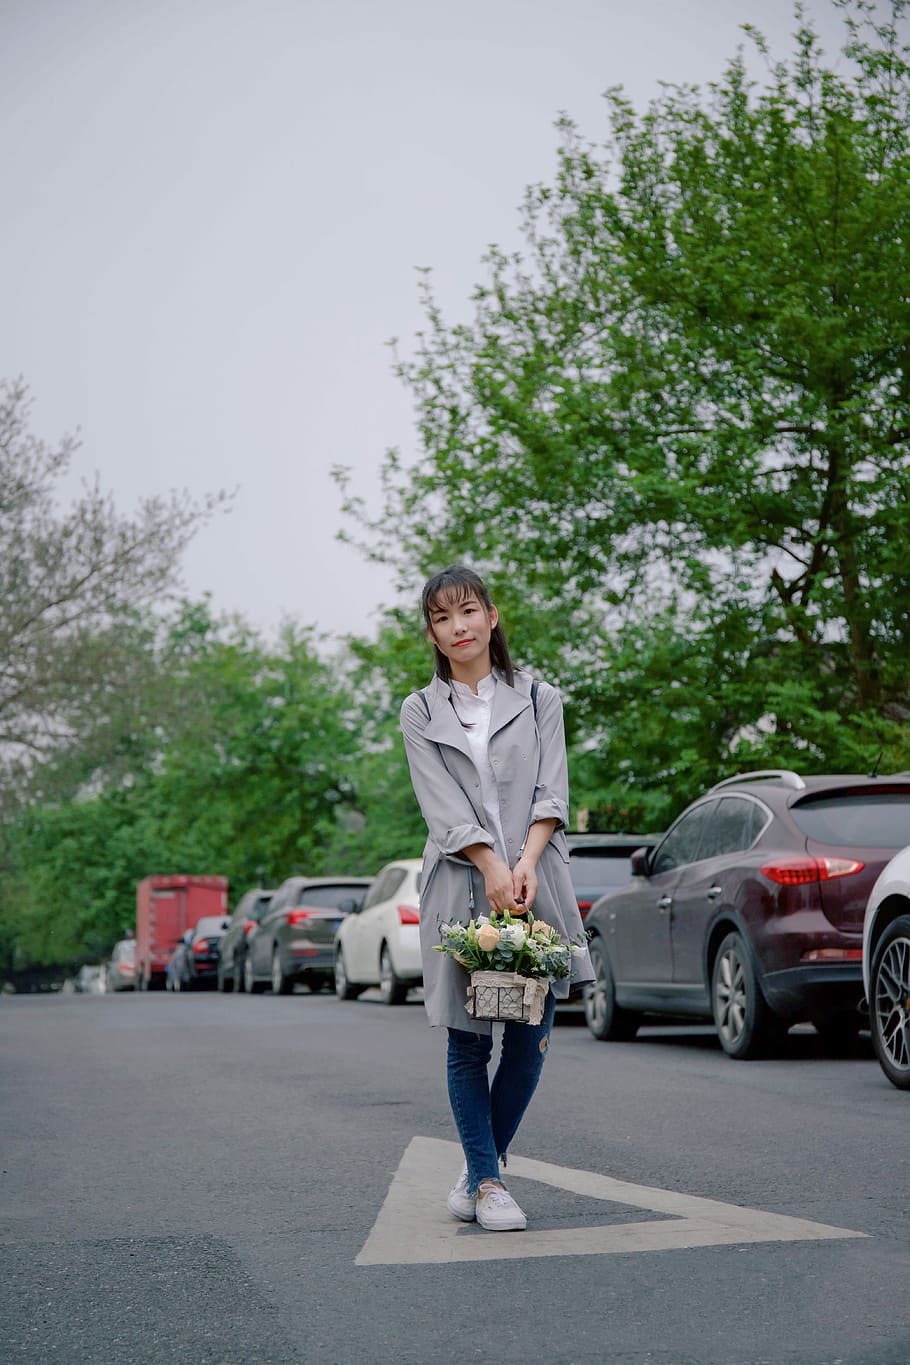 woman holding basket of flower standing in middle of road near parked vehicles, woman holding basket standing near vehicles on road under tree at daytime, HD wallpaper